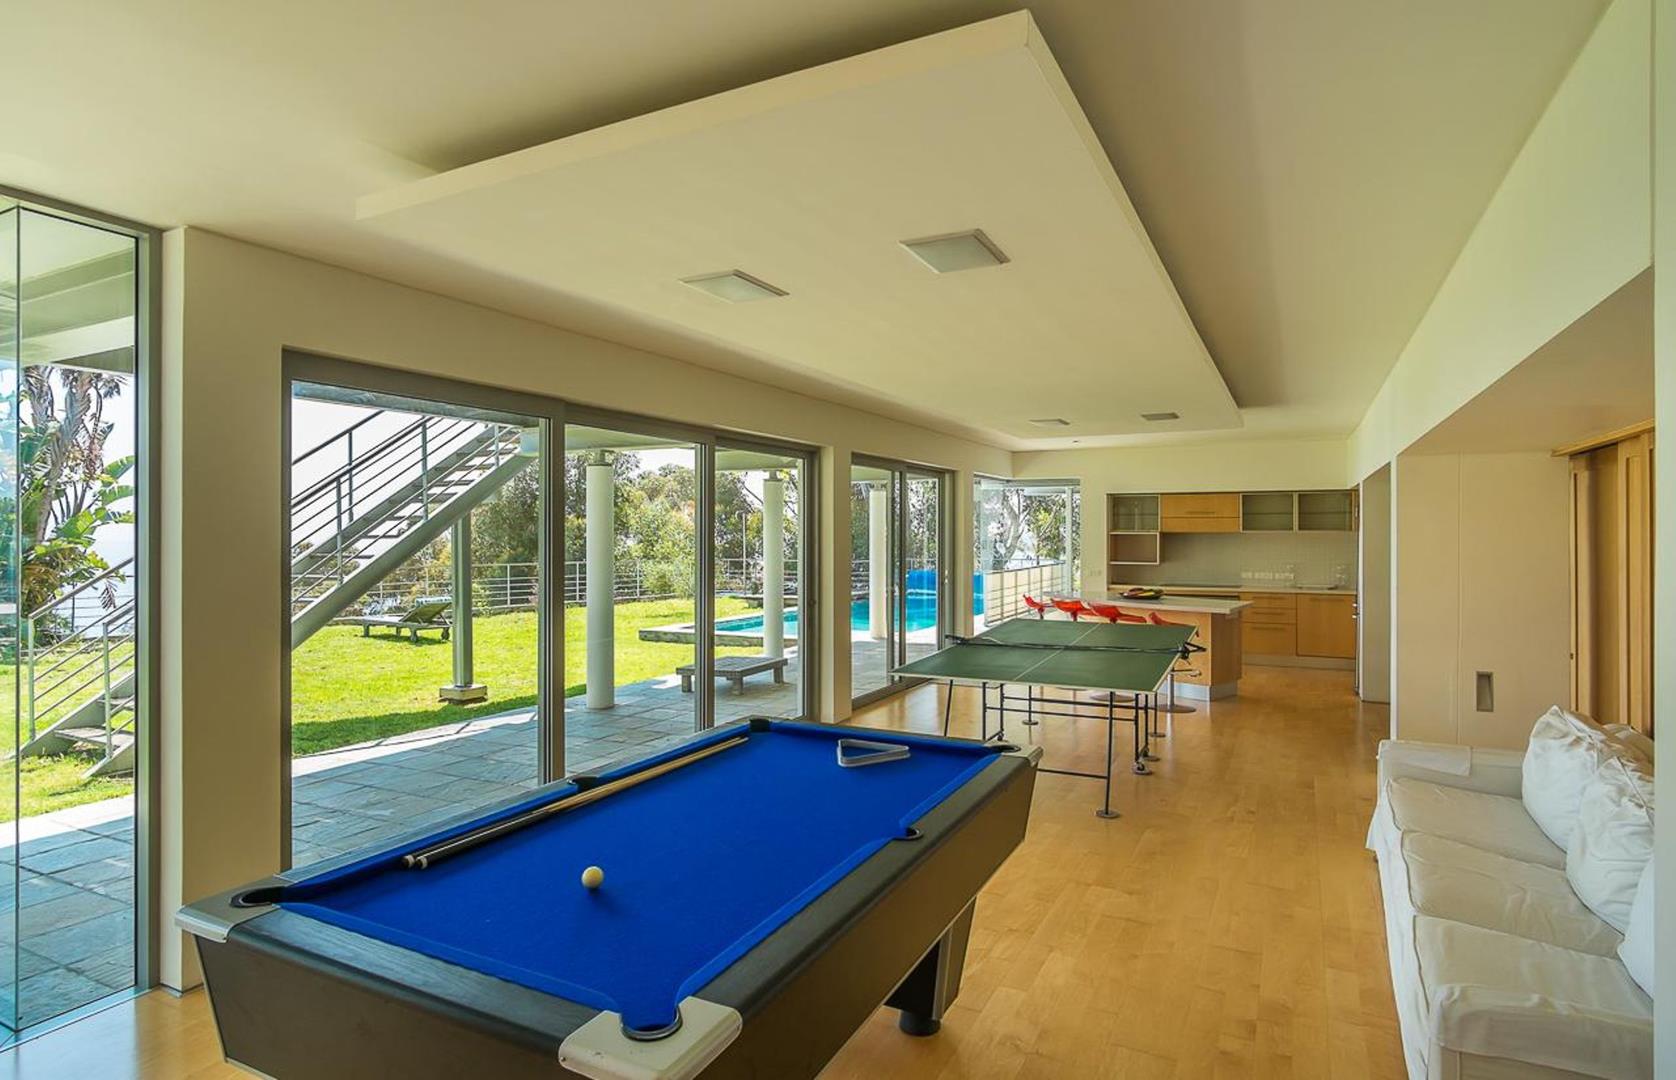 Sea side property in Cape Town, South Africa | Games Room | Jawitz Properties | Finest Residences